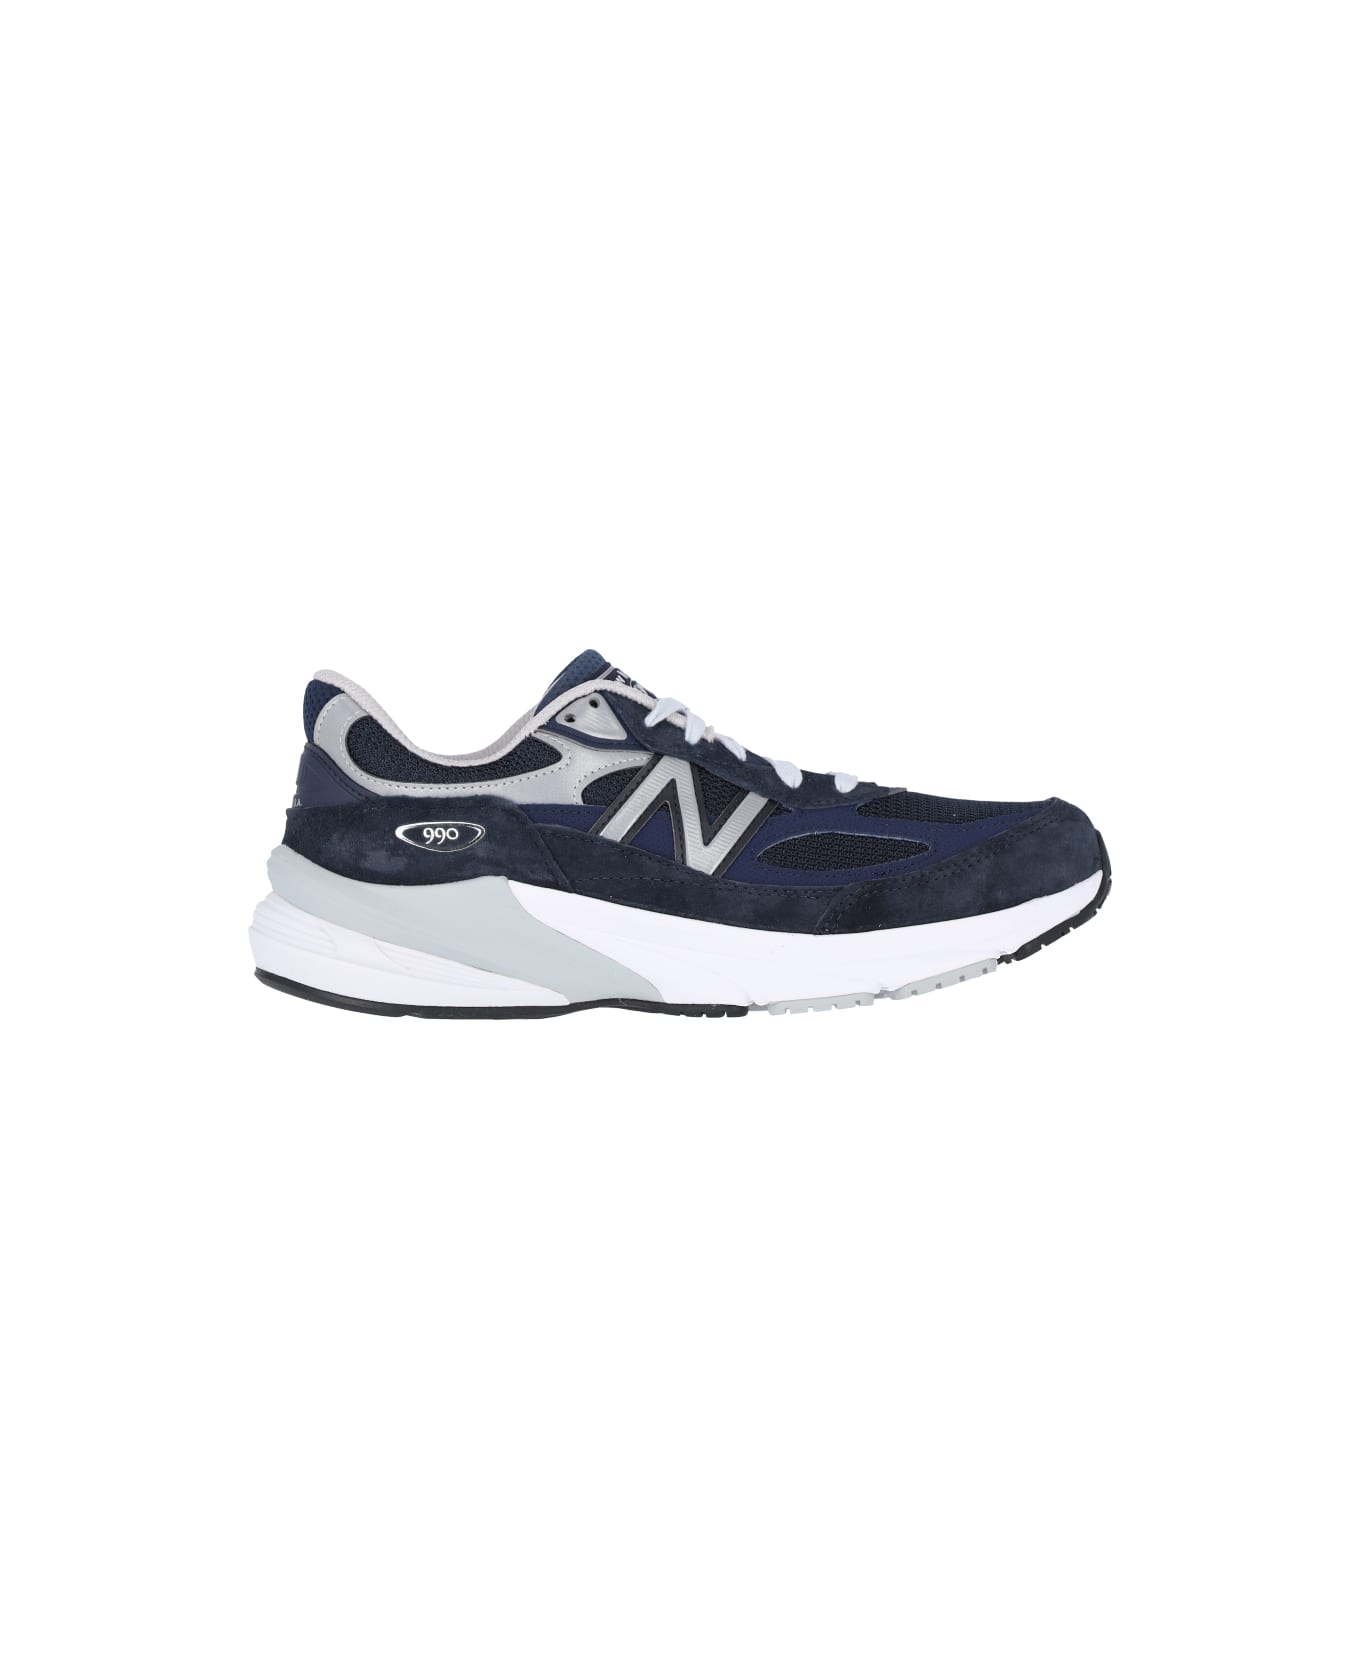 New Balance "made In Usa 990v6" Sneakers - Blue